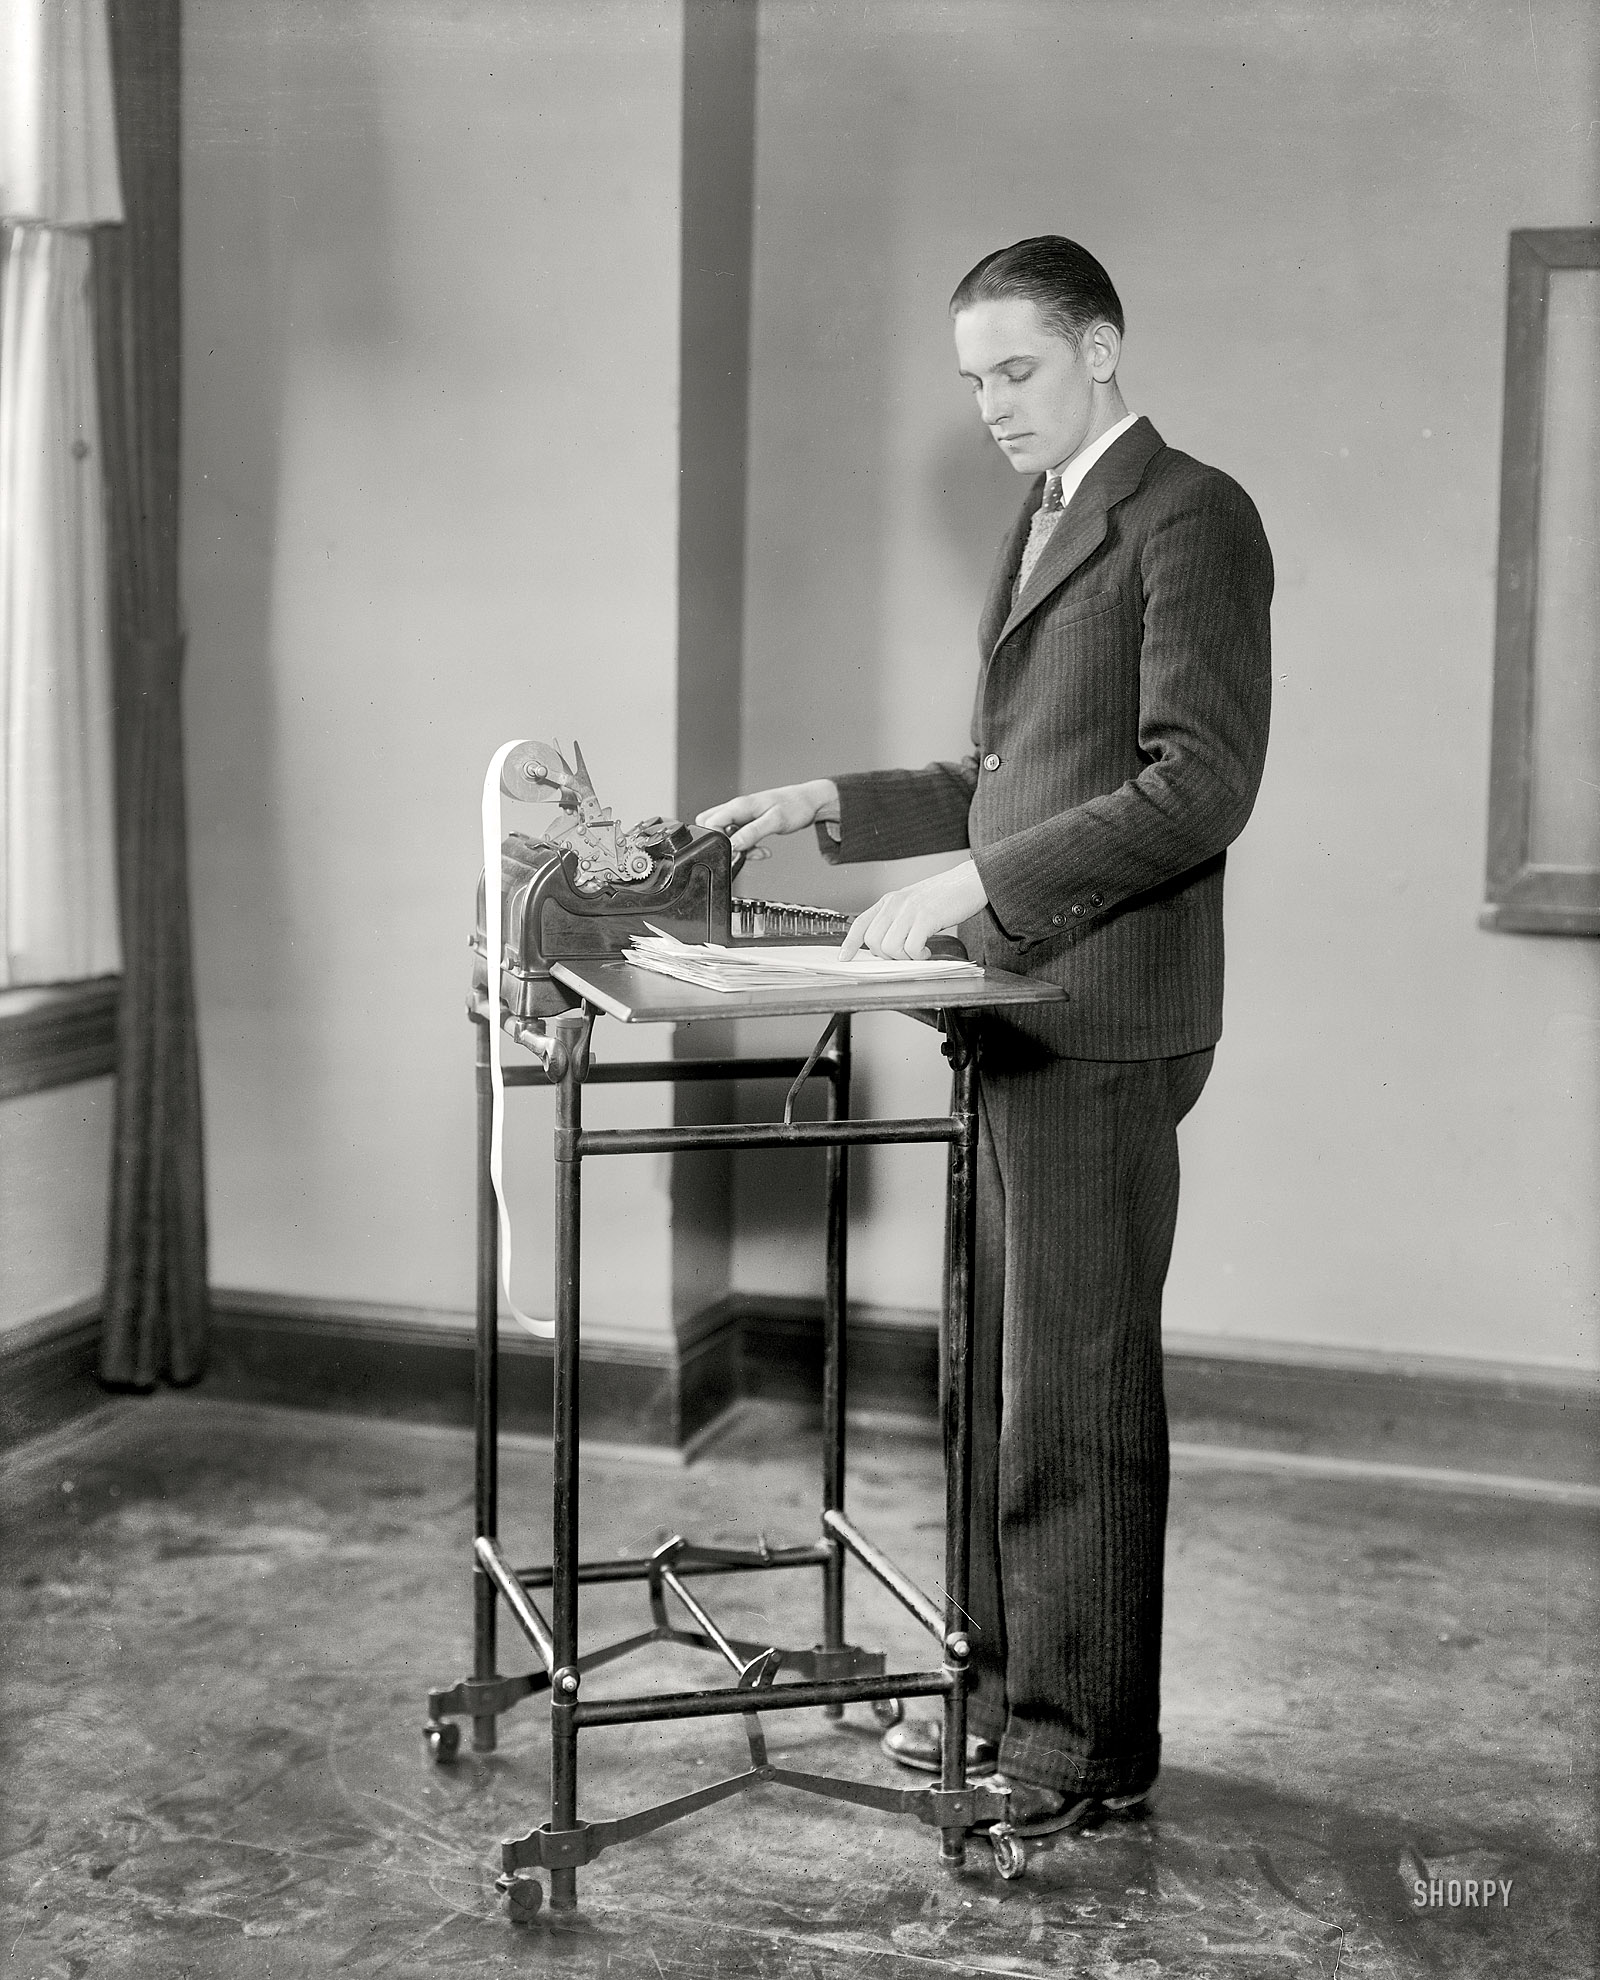 Washington, D.C., circa 1928. "Strayer's Business College." The debonair opposite number to this clerical cutie. Harris & Ewing glass negative. View full size.